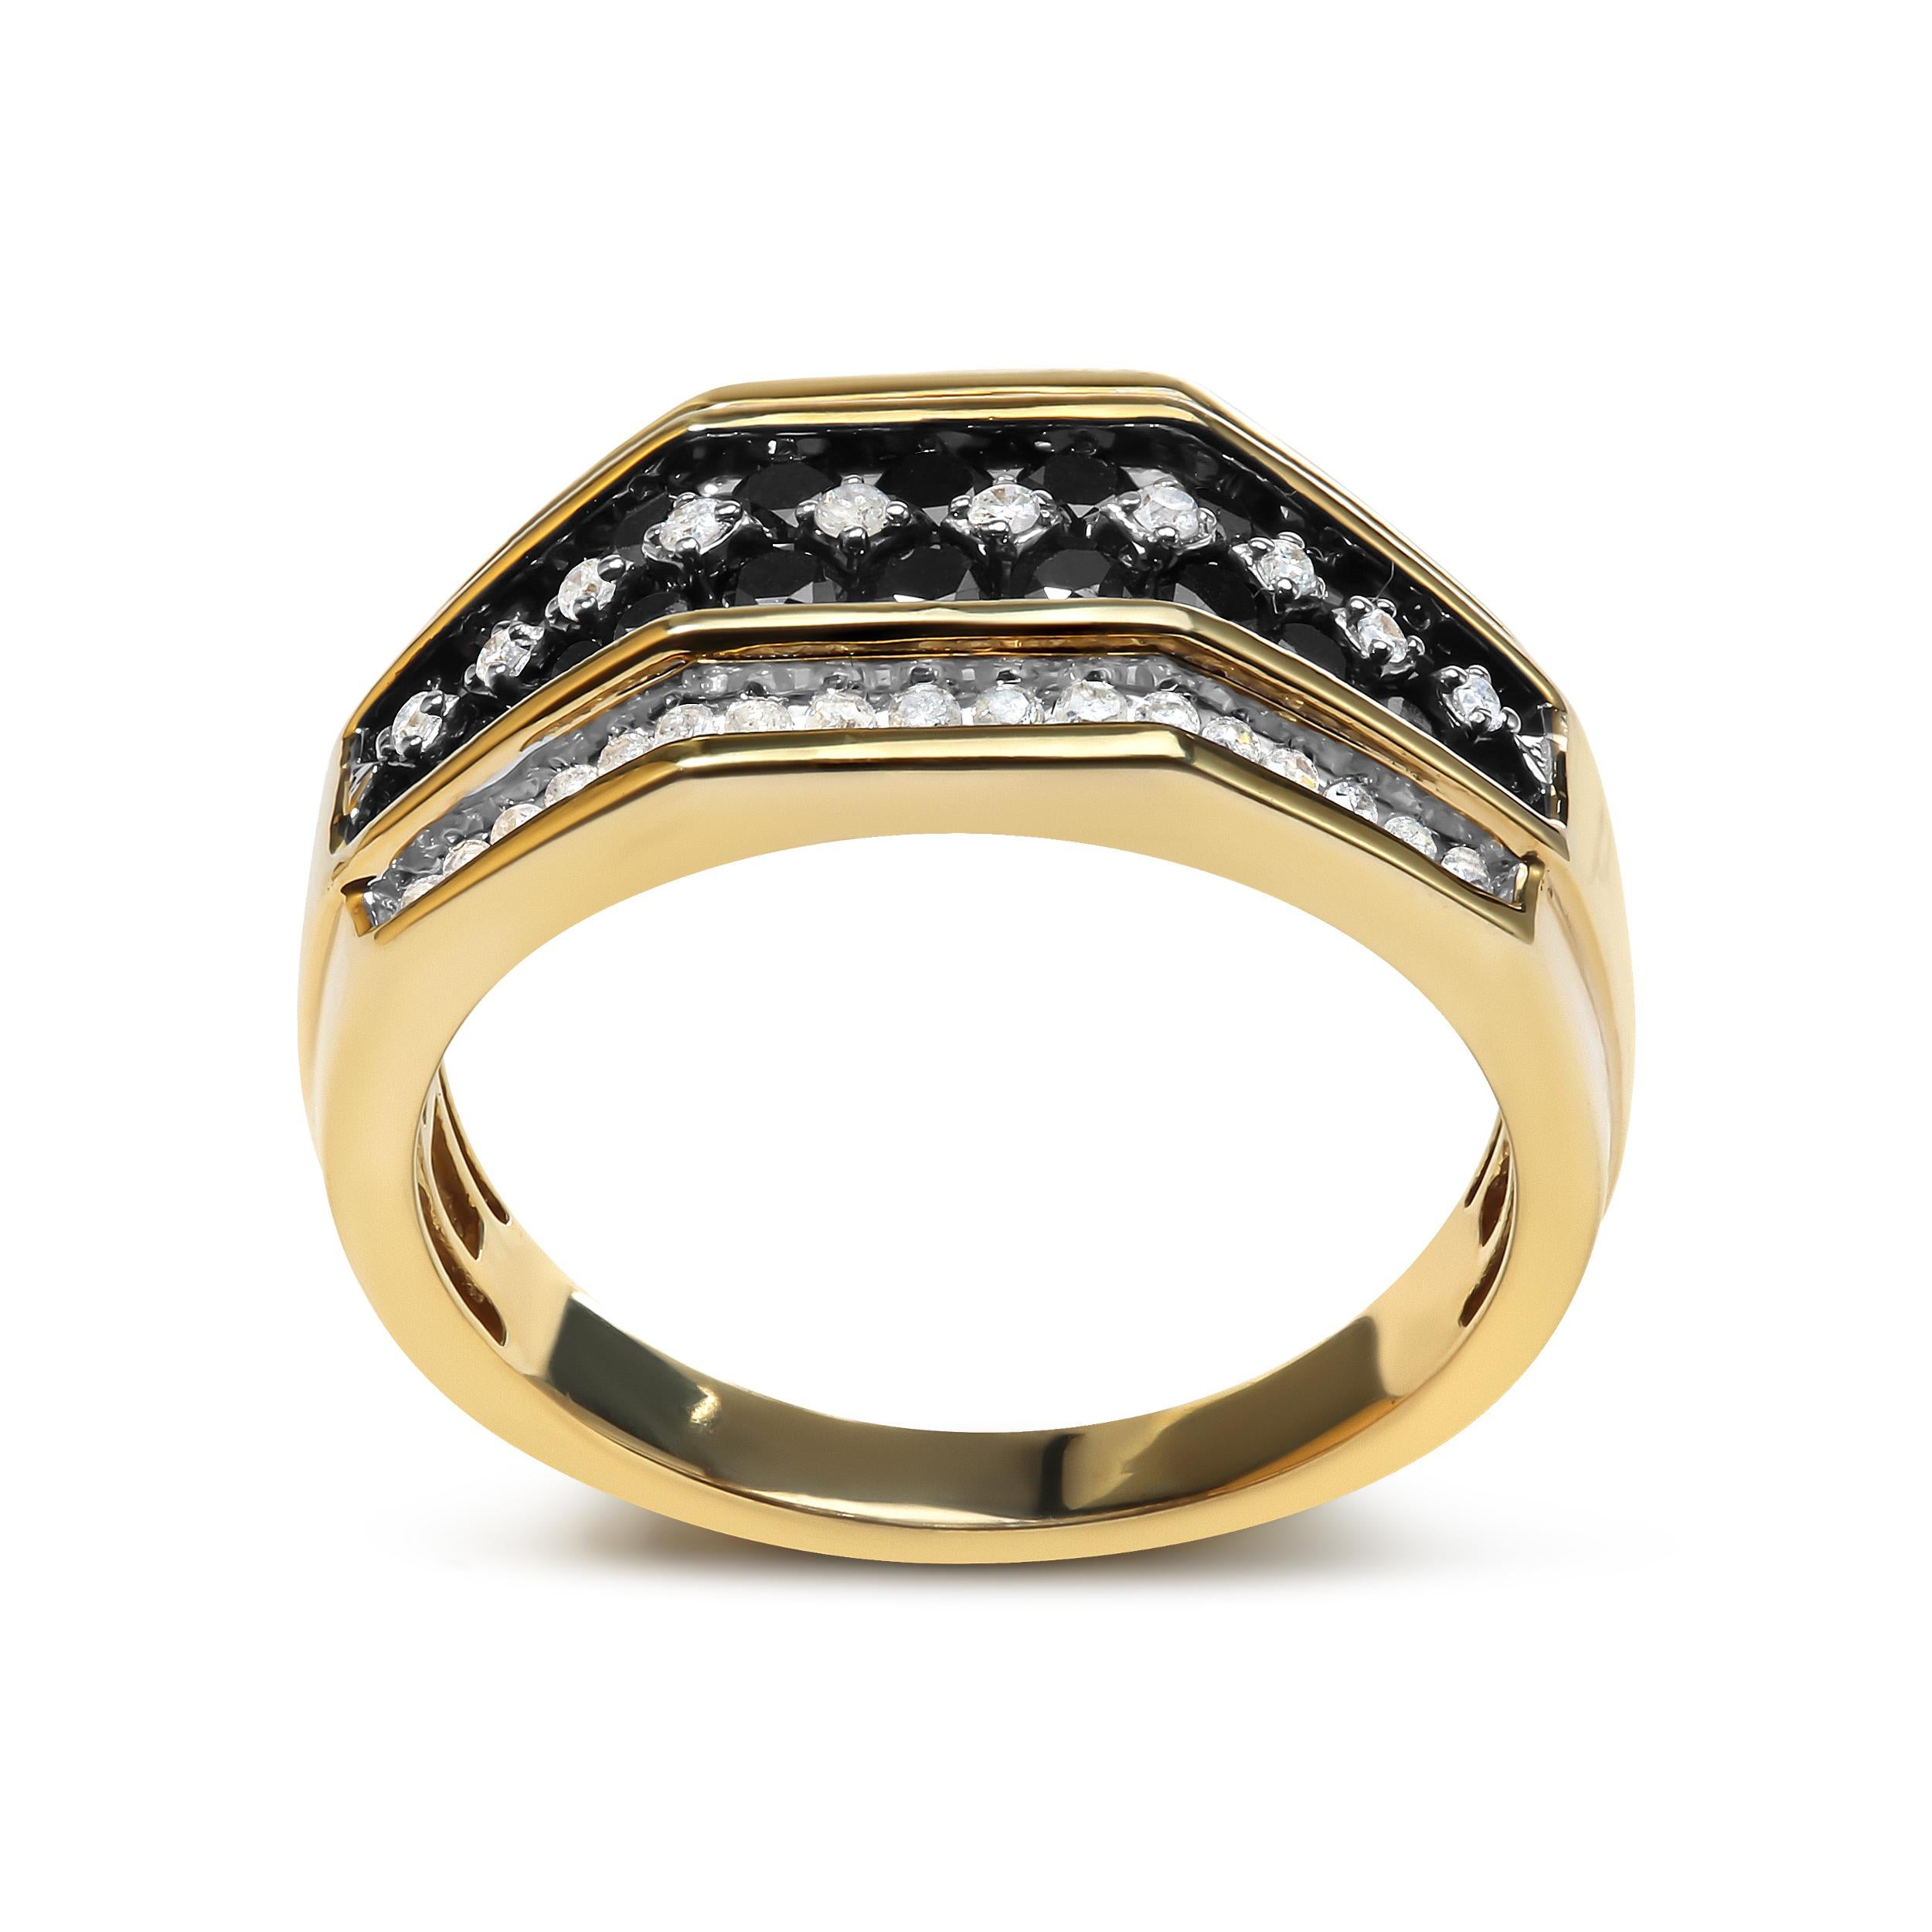 Indulge in luxury with our stunning Men's Black and White Diamond Band Ring. This remarkable piece is crafted from 10K Yellow Gold , creating an intricate and stylish design that exudes sophistication. With 66 round, natural diamonds totaling 1.5